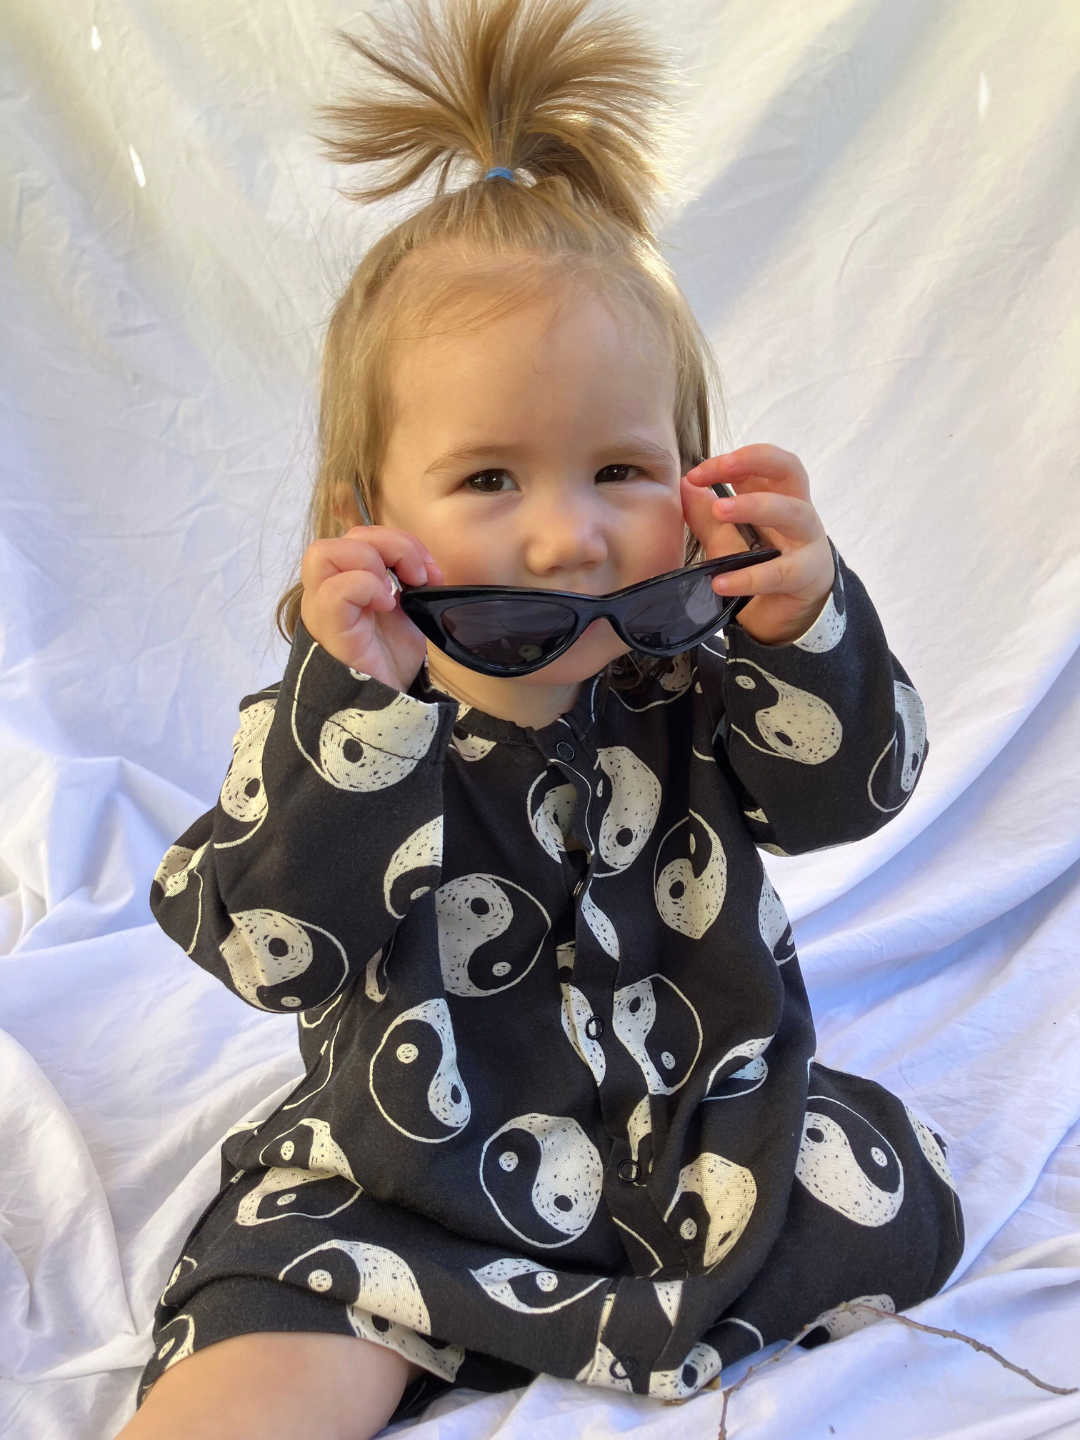 Black | A child wearing the black Stingray kids Sunglasses. She is seated on a beige cloth backdrop and wears a black romper  patterned with white yin yangs, and her hair in a top ponytail.